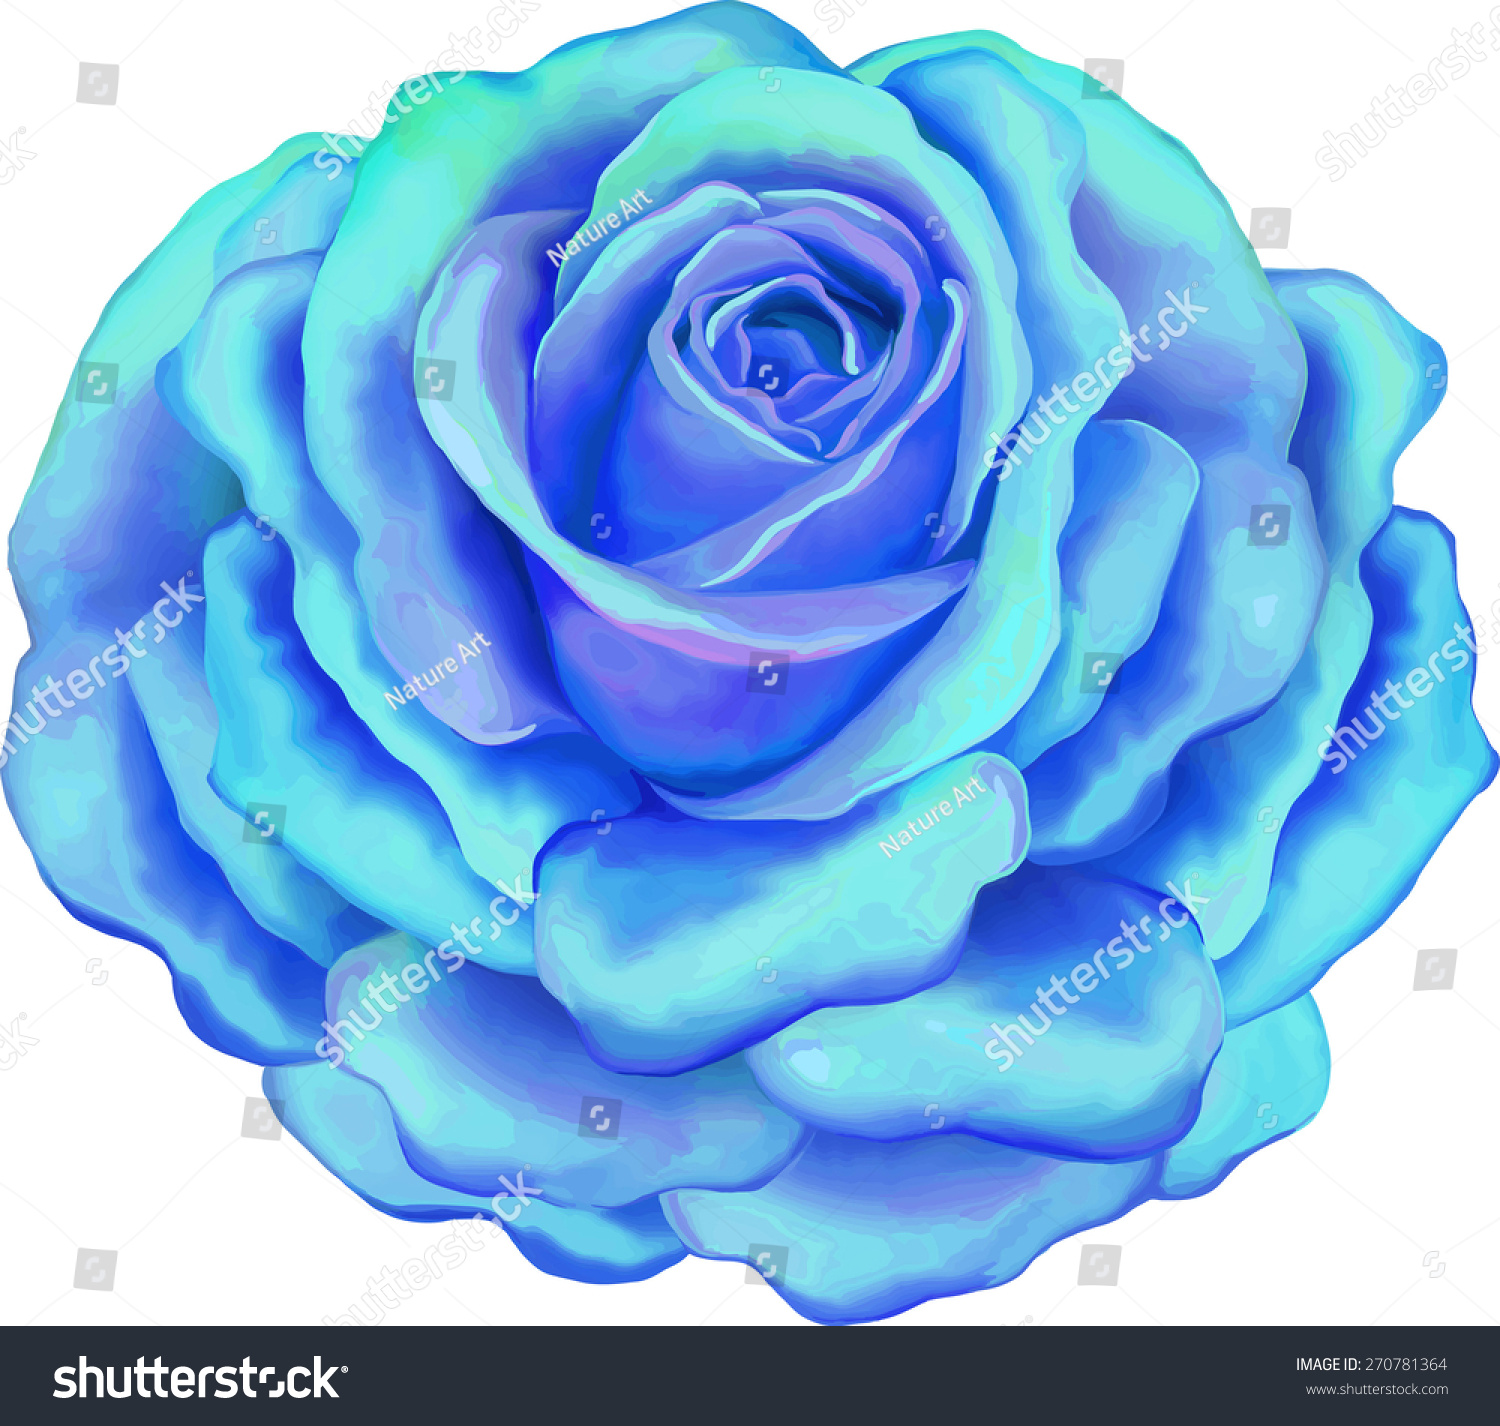 Beautiful Blue Rose Flower Isolated On Stock Vector Royalty Free 270781364,Elegant Modern Contemporary Exterior House Paint Colors